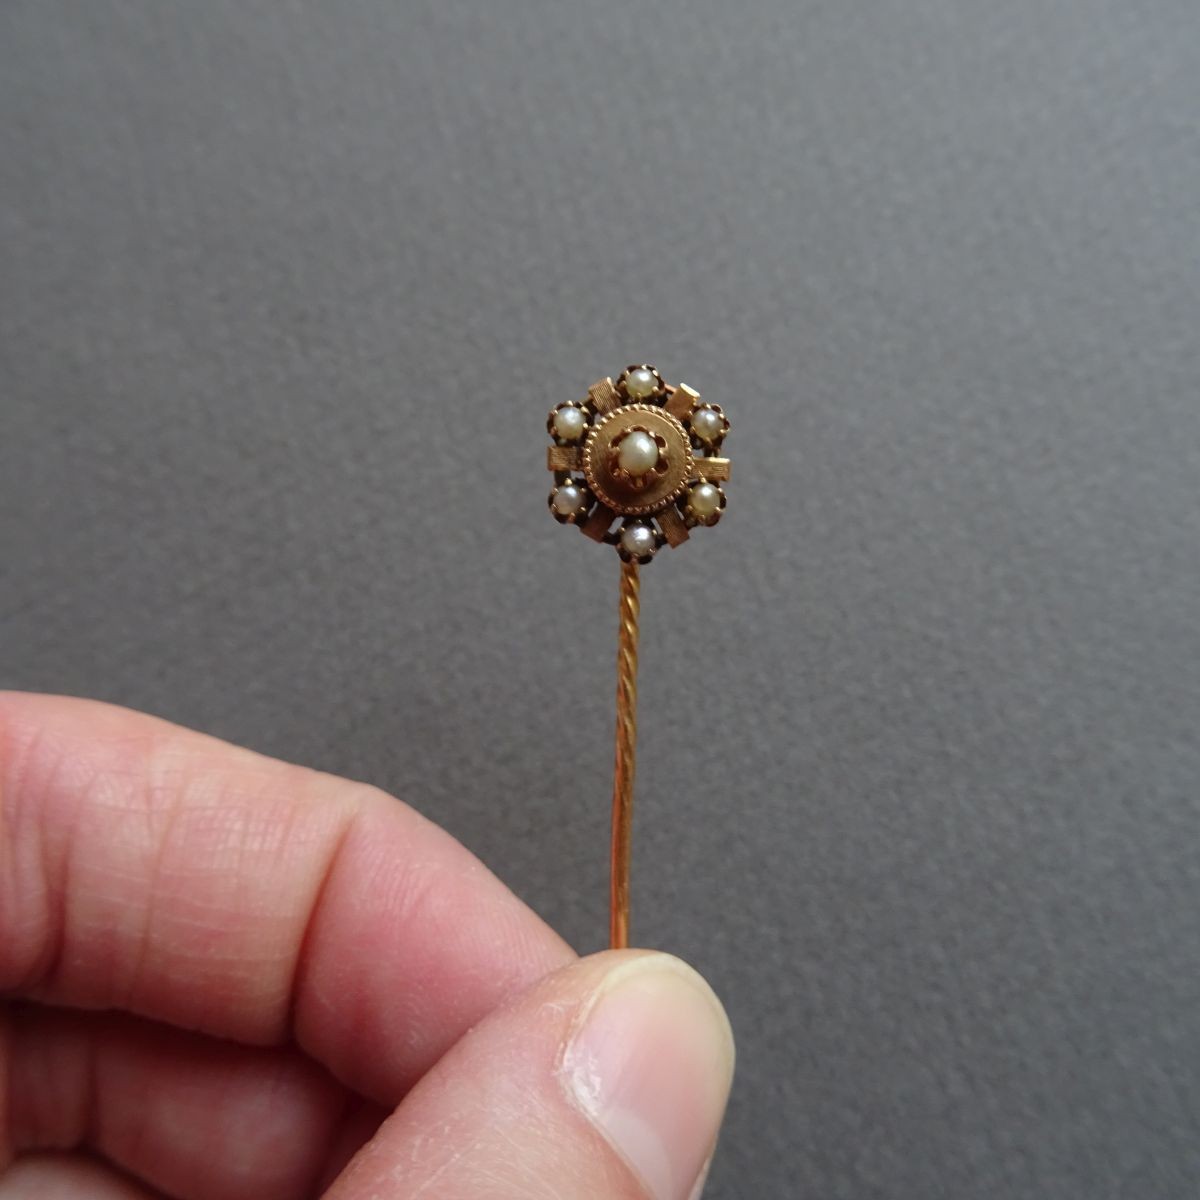 Una charla entre caballeros B38-very-nice-gold-lapel-pin-or-antique-tie-pin-with-small-pearls